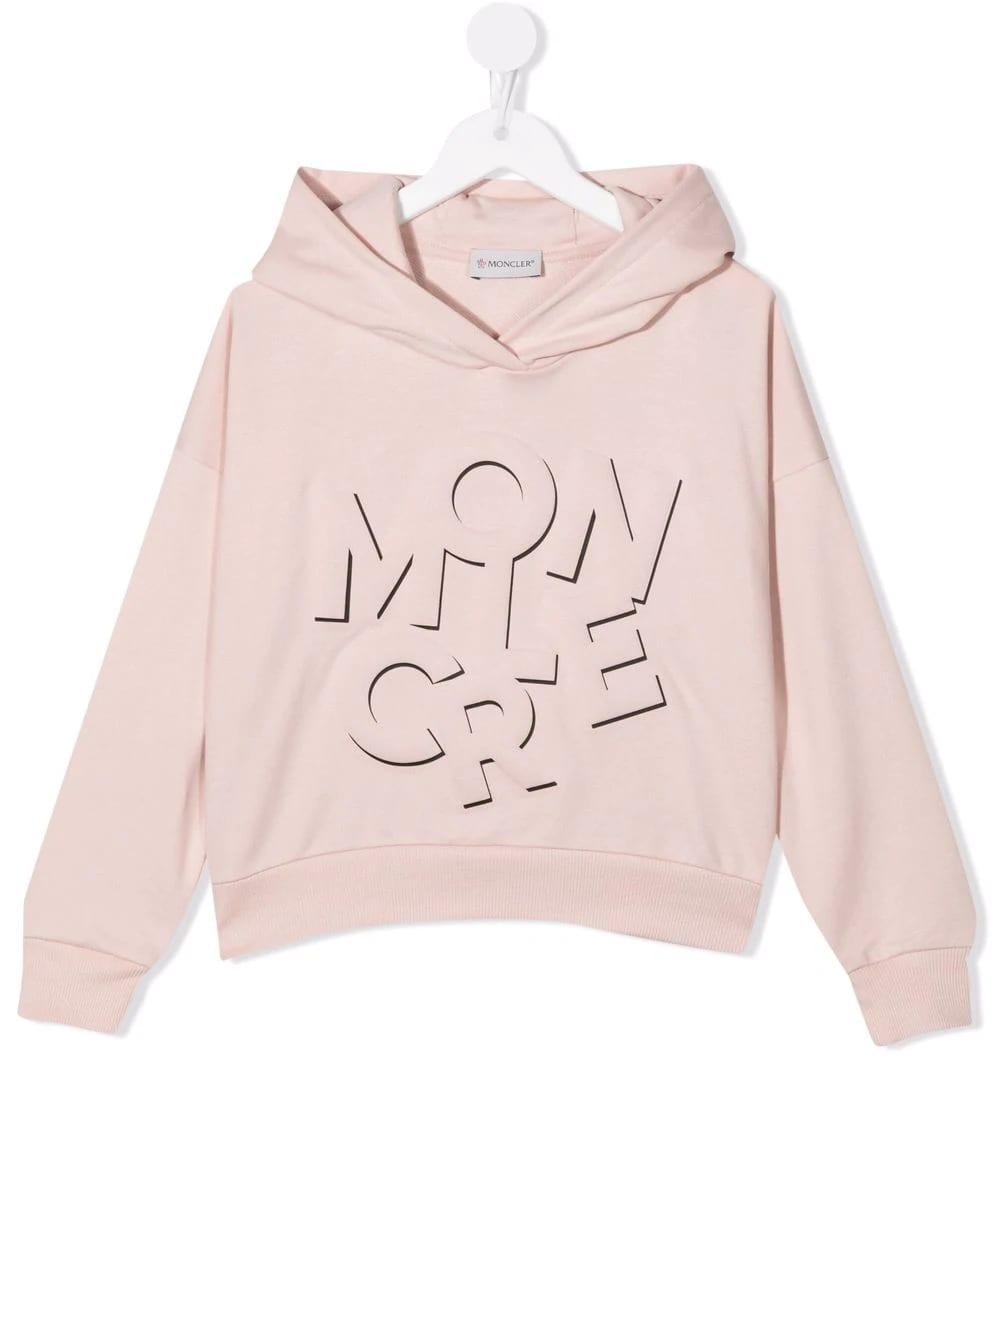 Moncler Kids Light Pink Hoodie With Deconstructed Logo